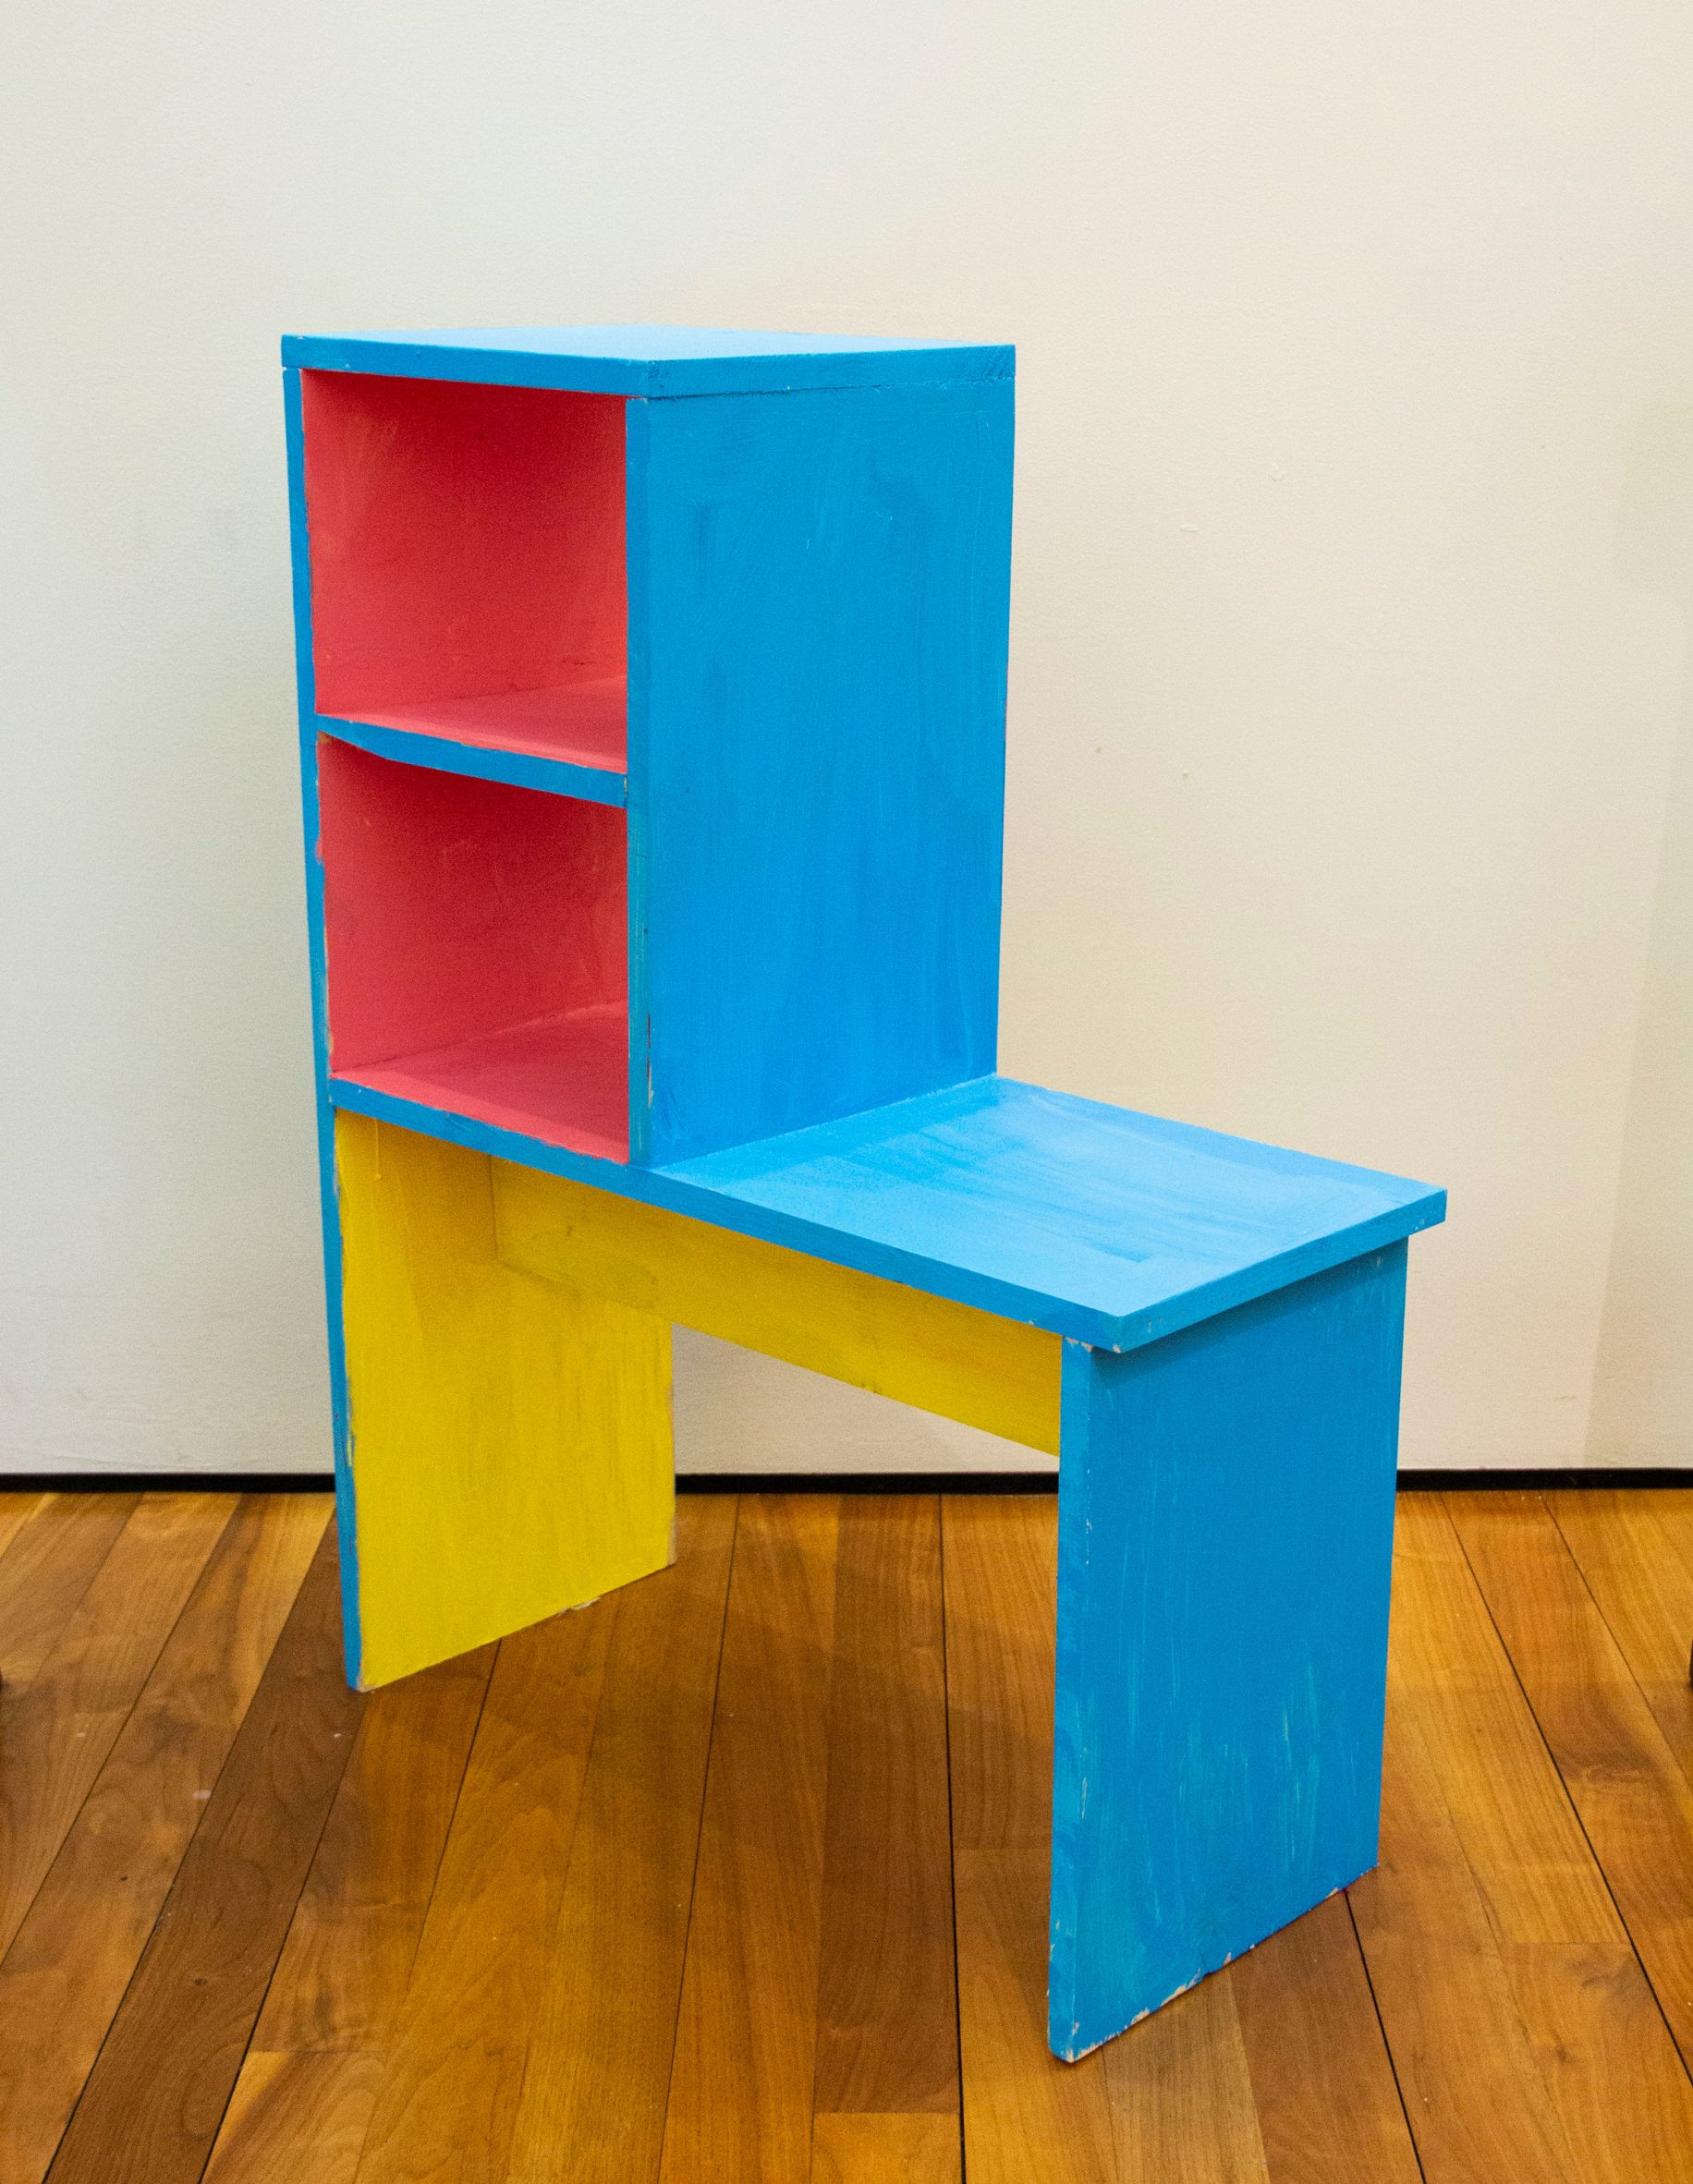 Chair with shelves built into the backrest, painted in flat planes of blue, pink and yellow